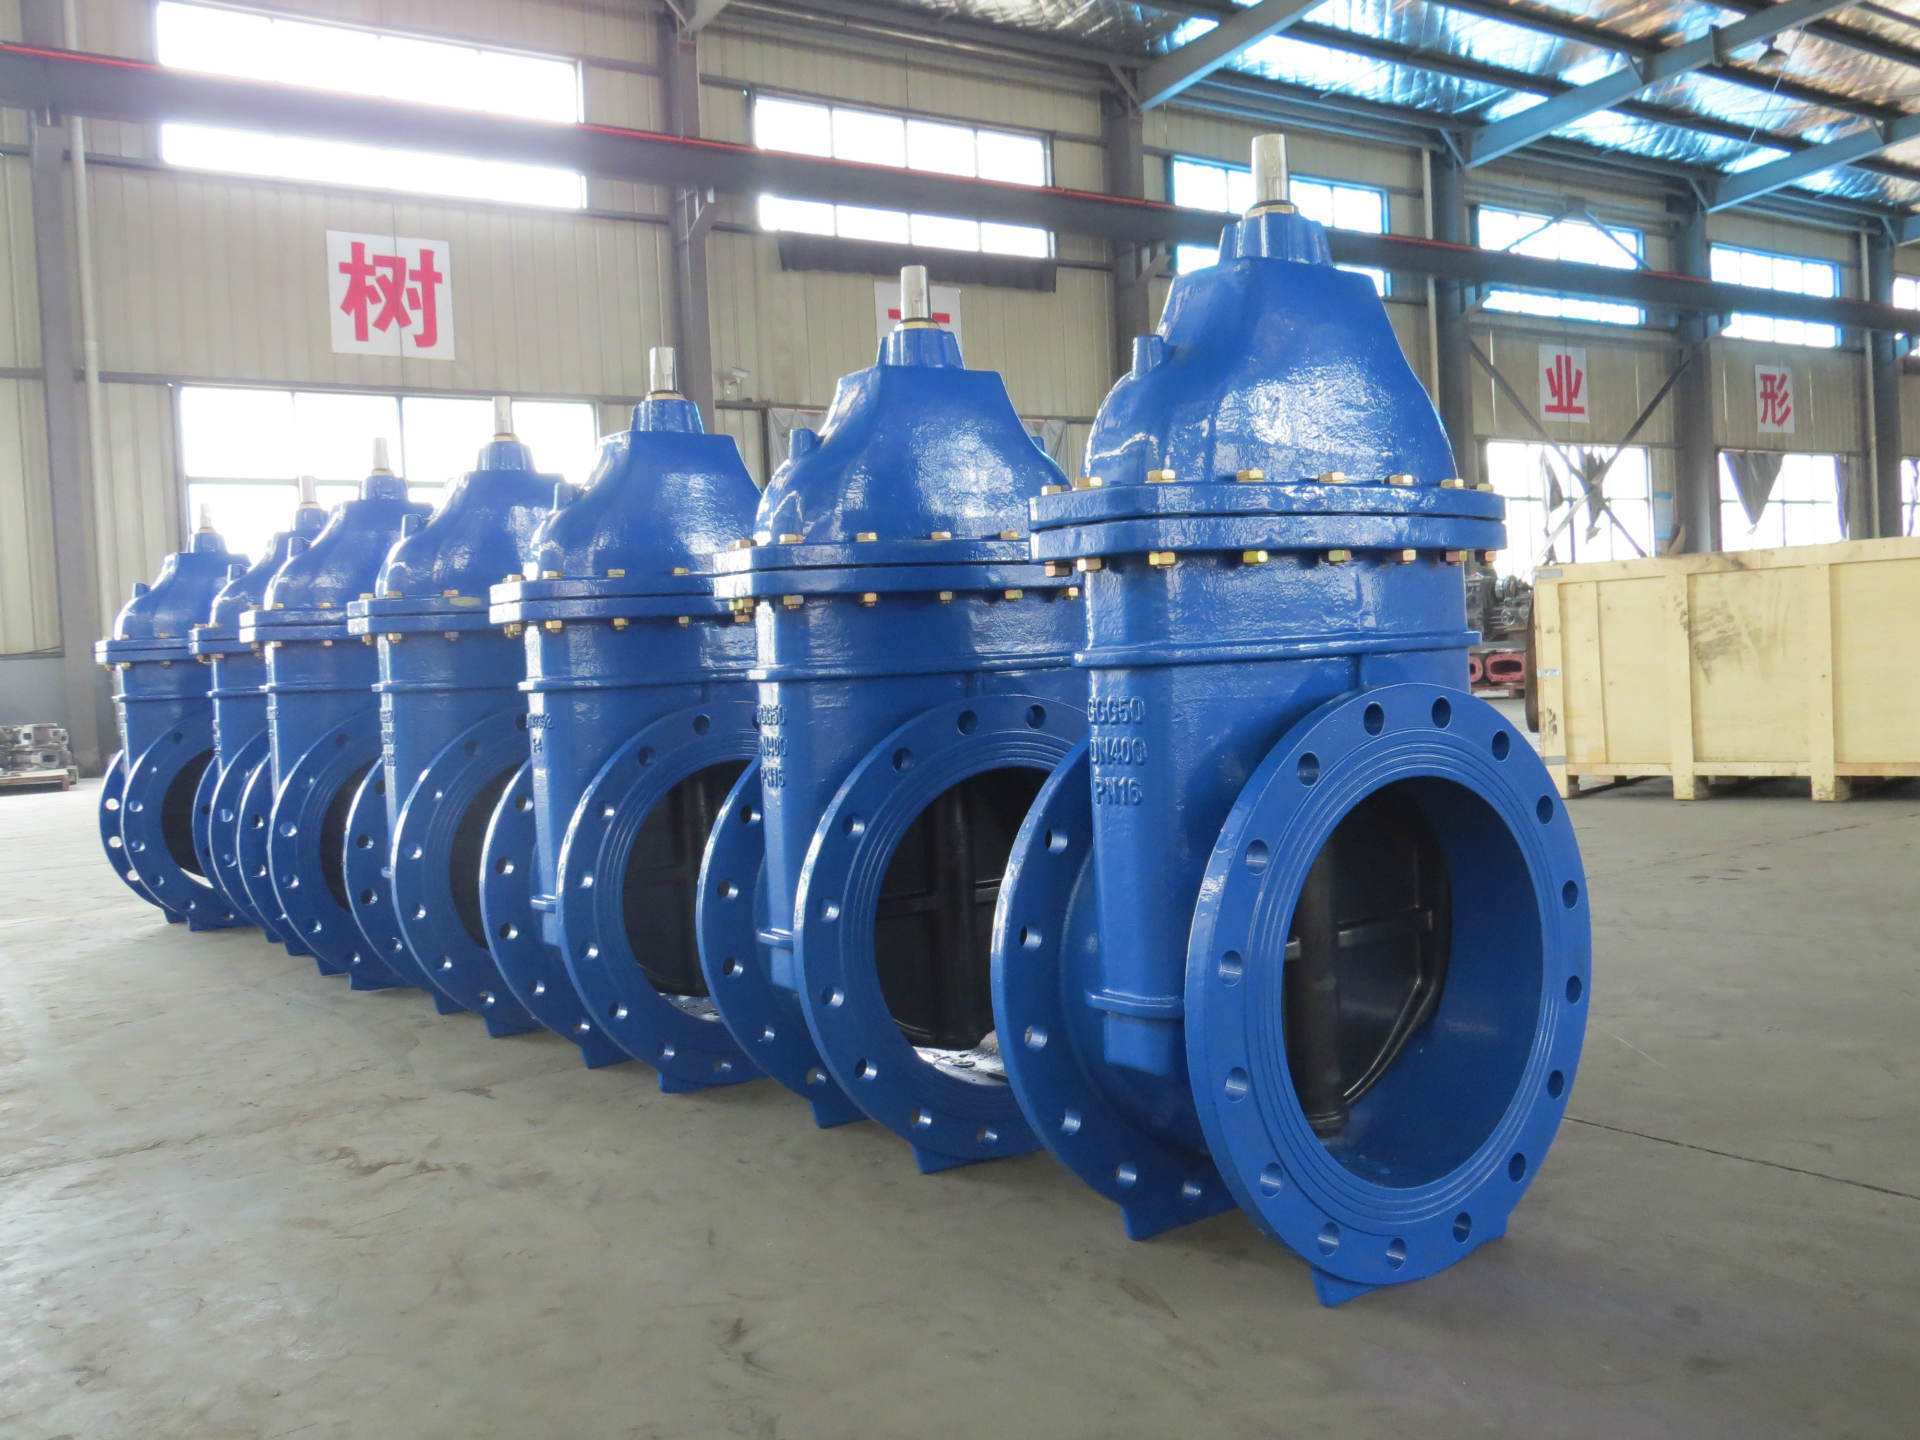 Soft Seated Oval Body Gate Valve Manufacturer